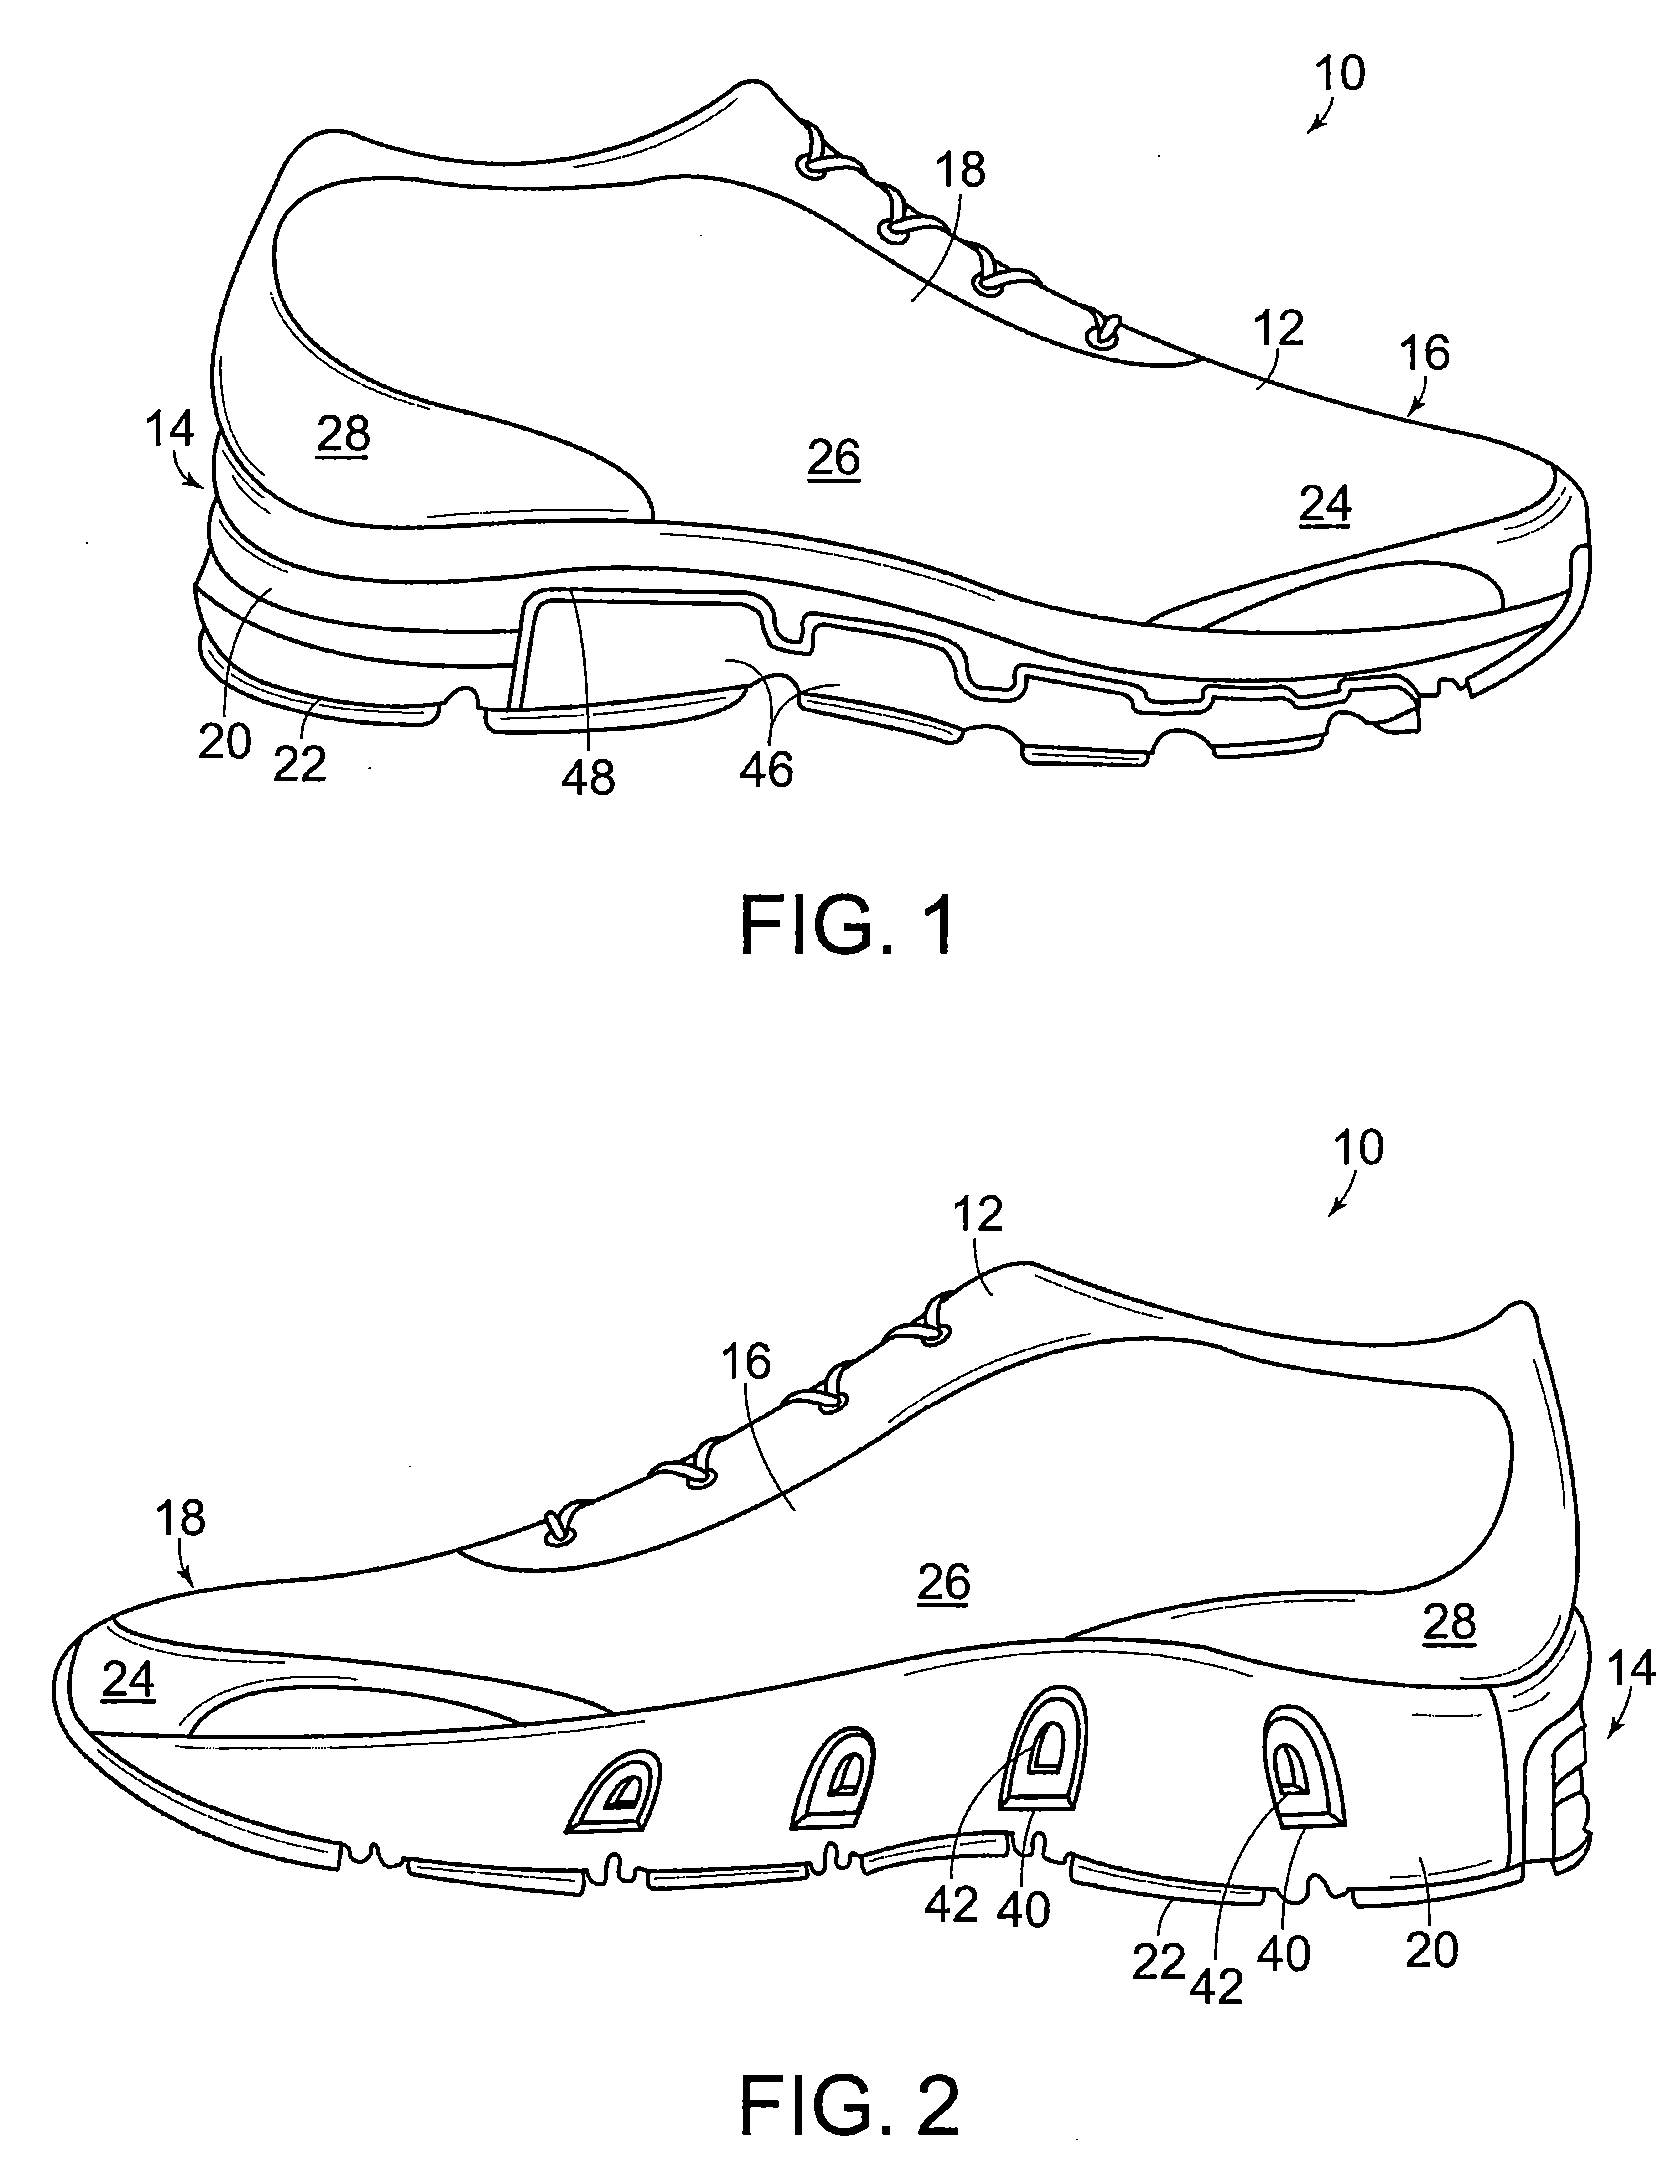 Article of footwear with midsole having higher density peripheral portion